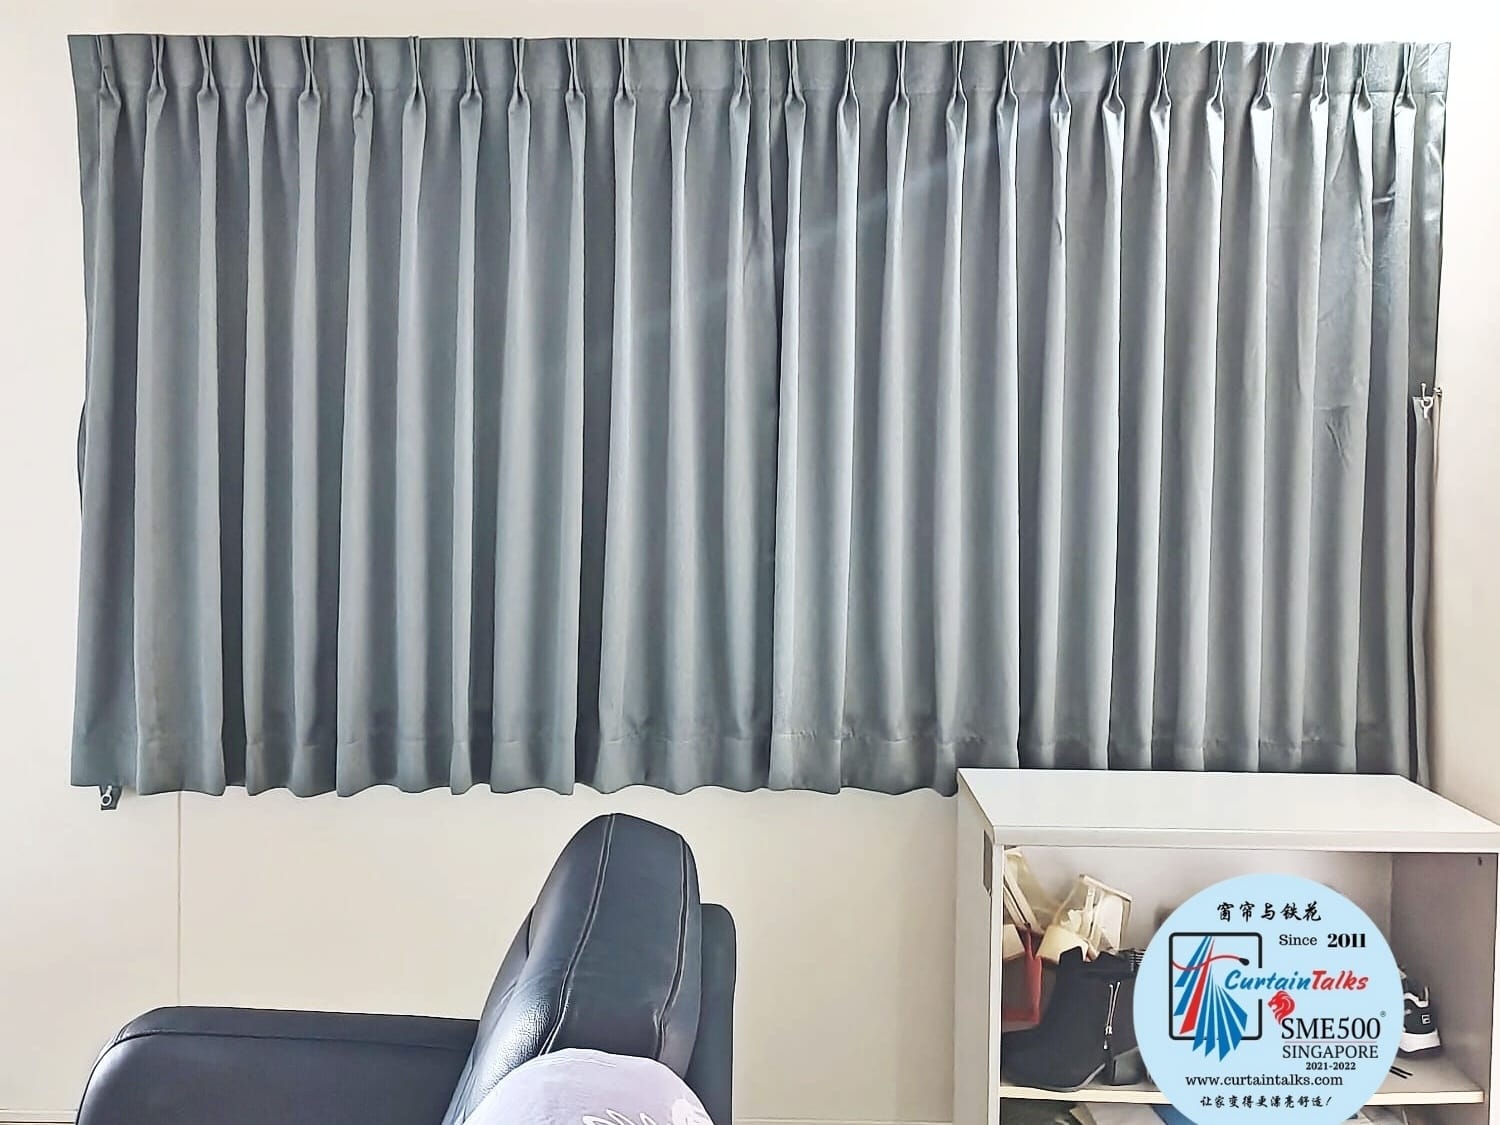 This is a Picture of Half-height curtain at Singapore HDB 714 Tampines Street 71